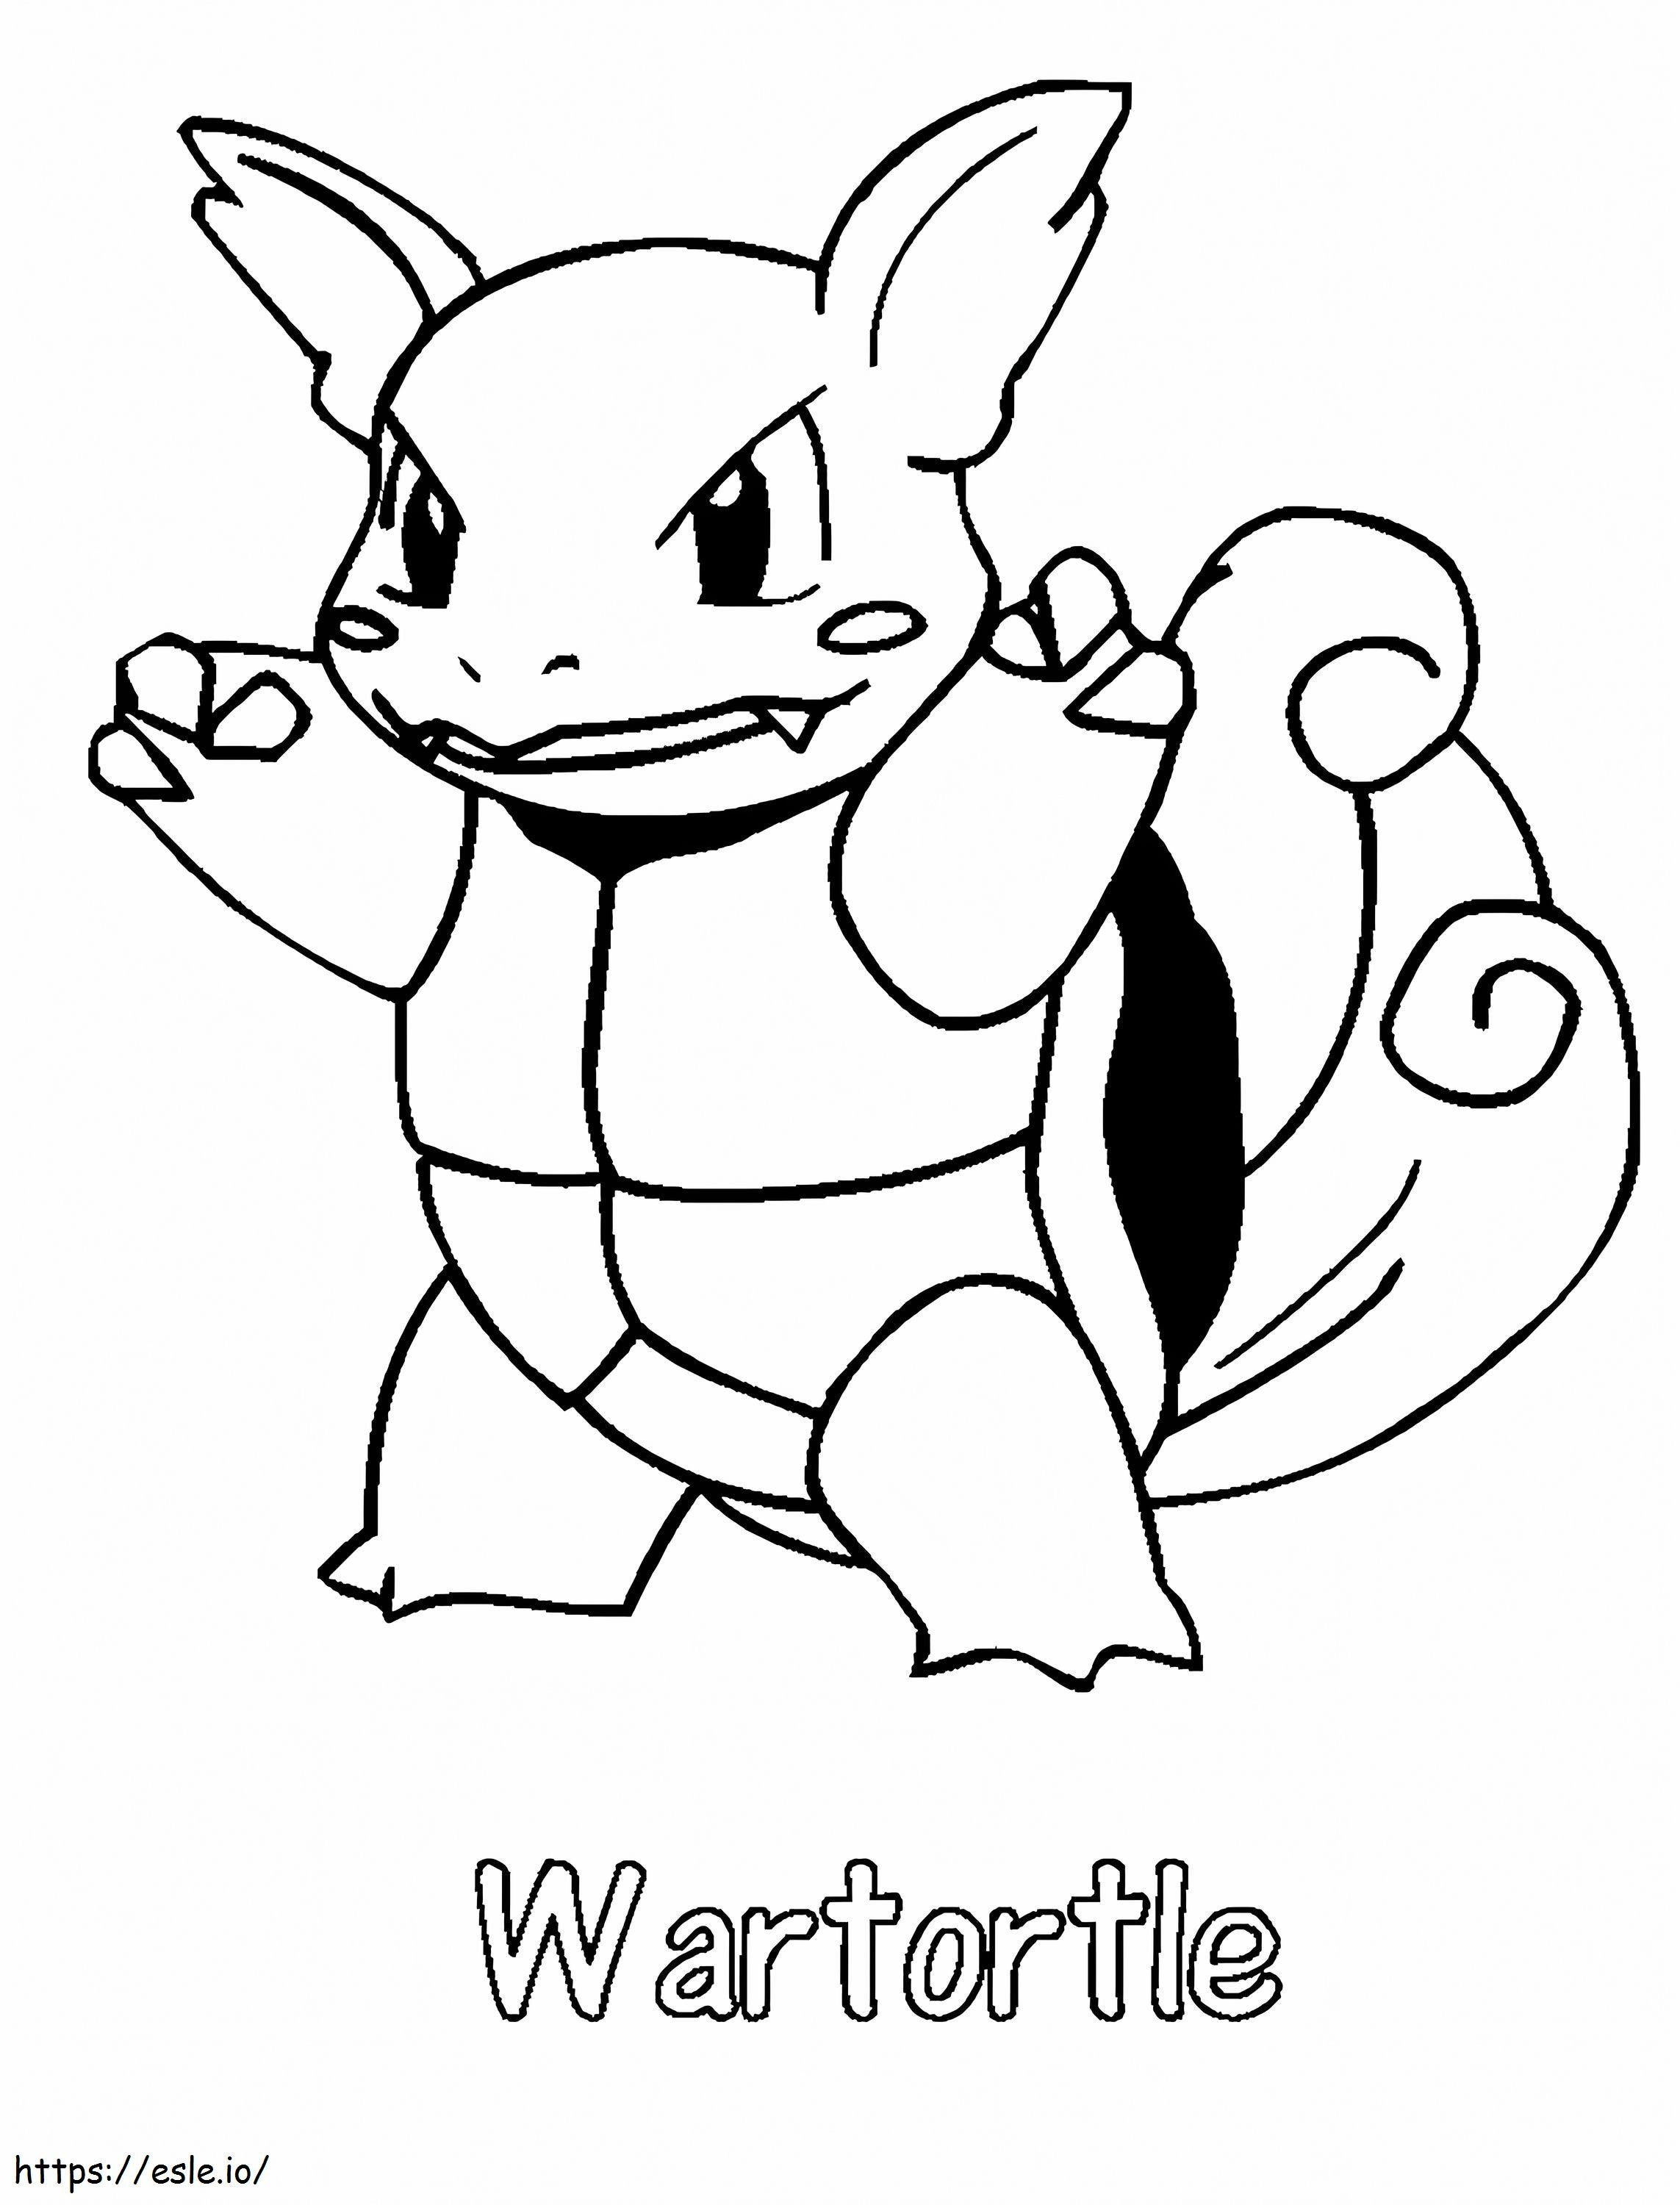 Wartortle 3 coloring page